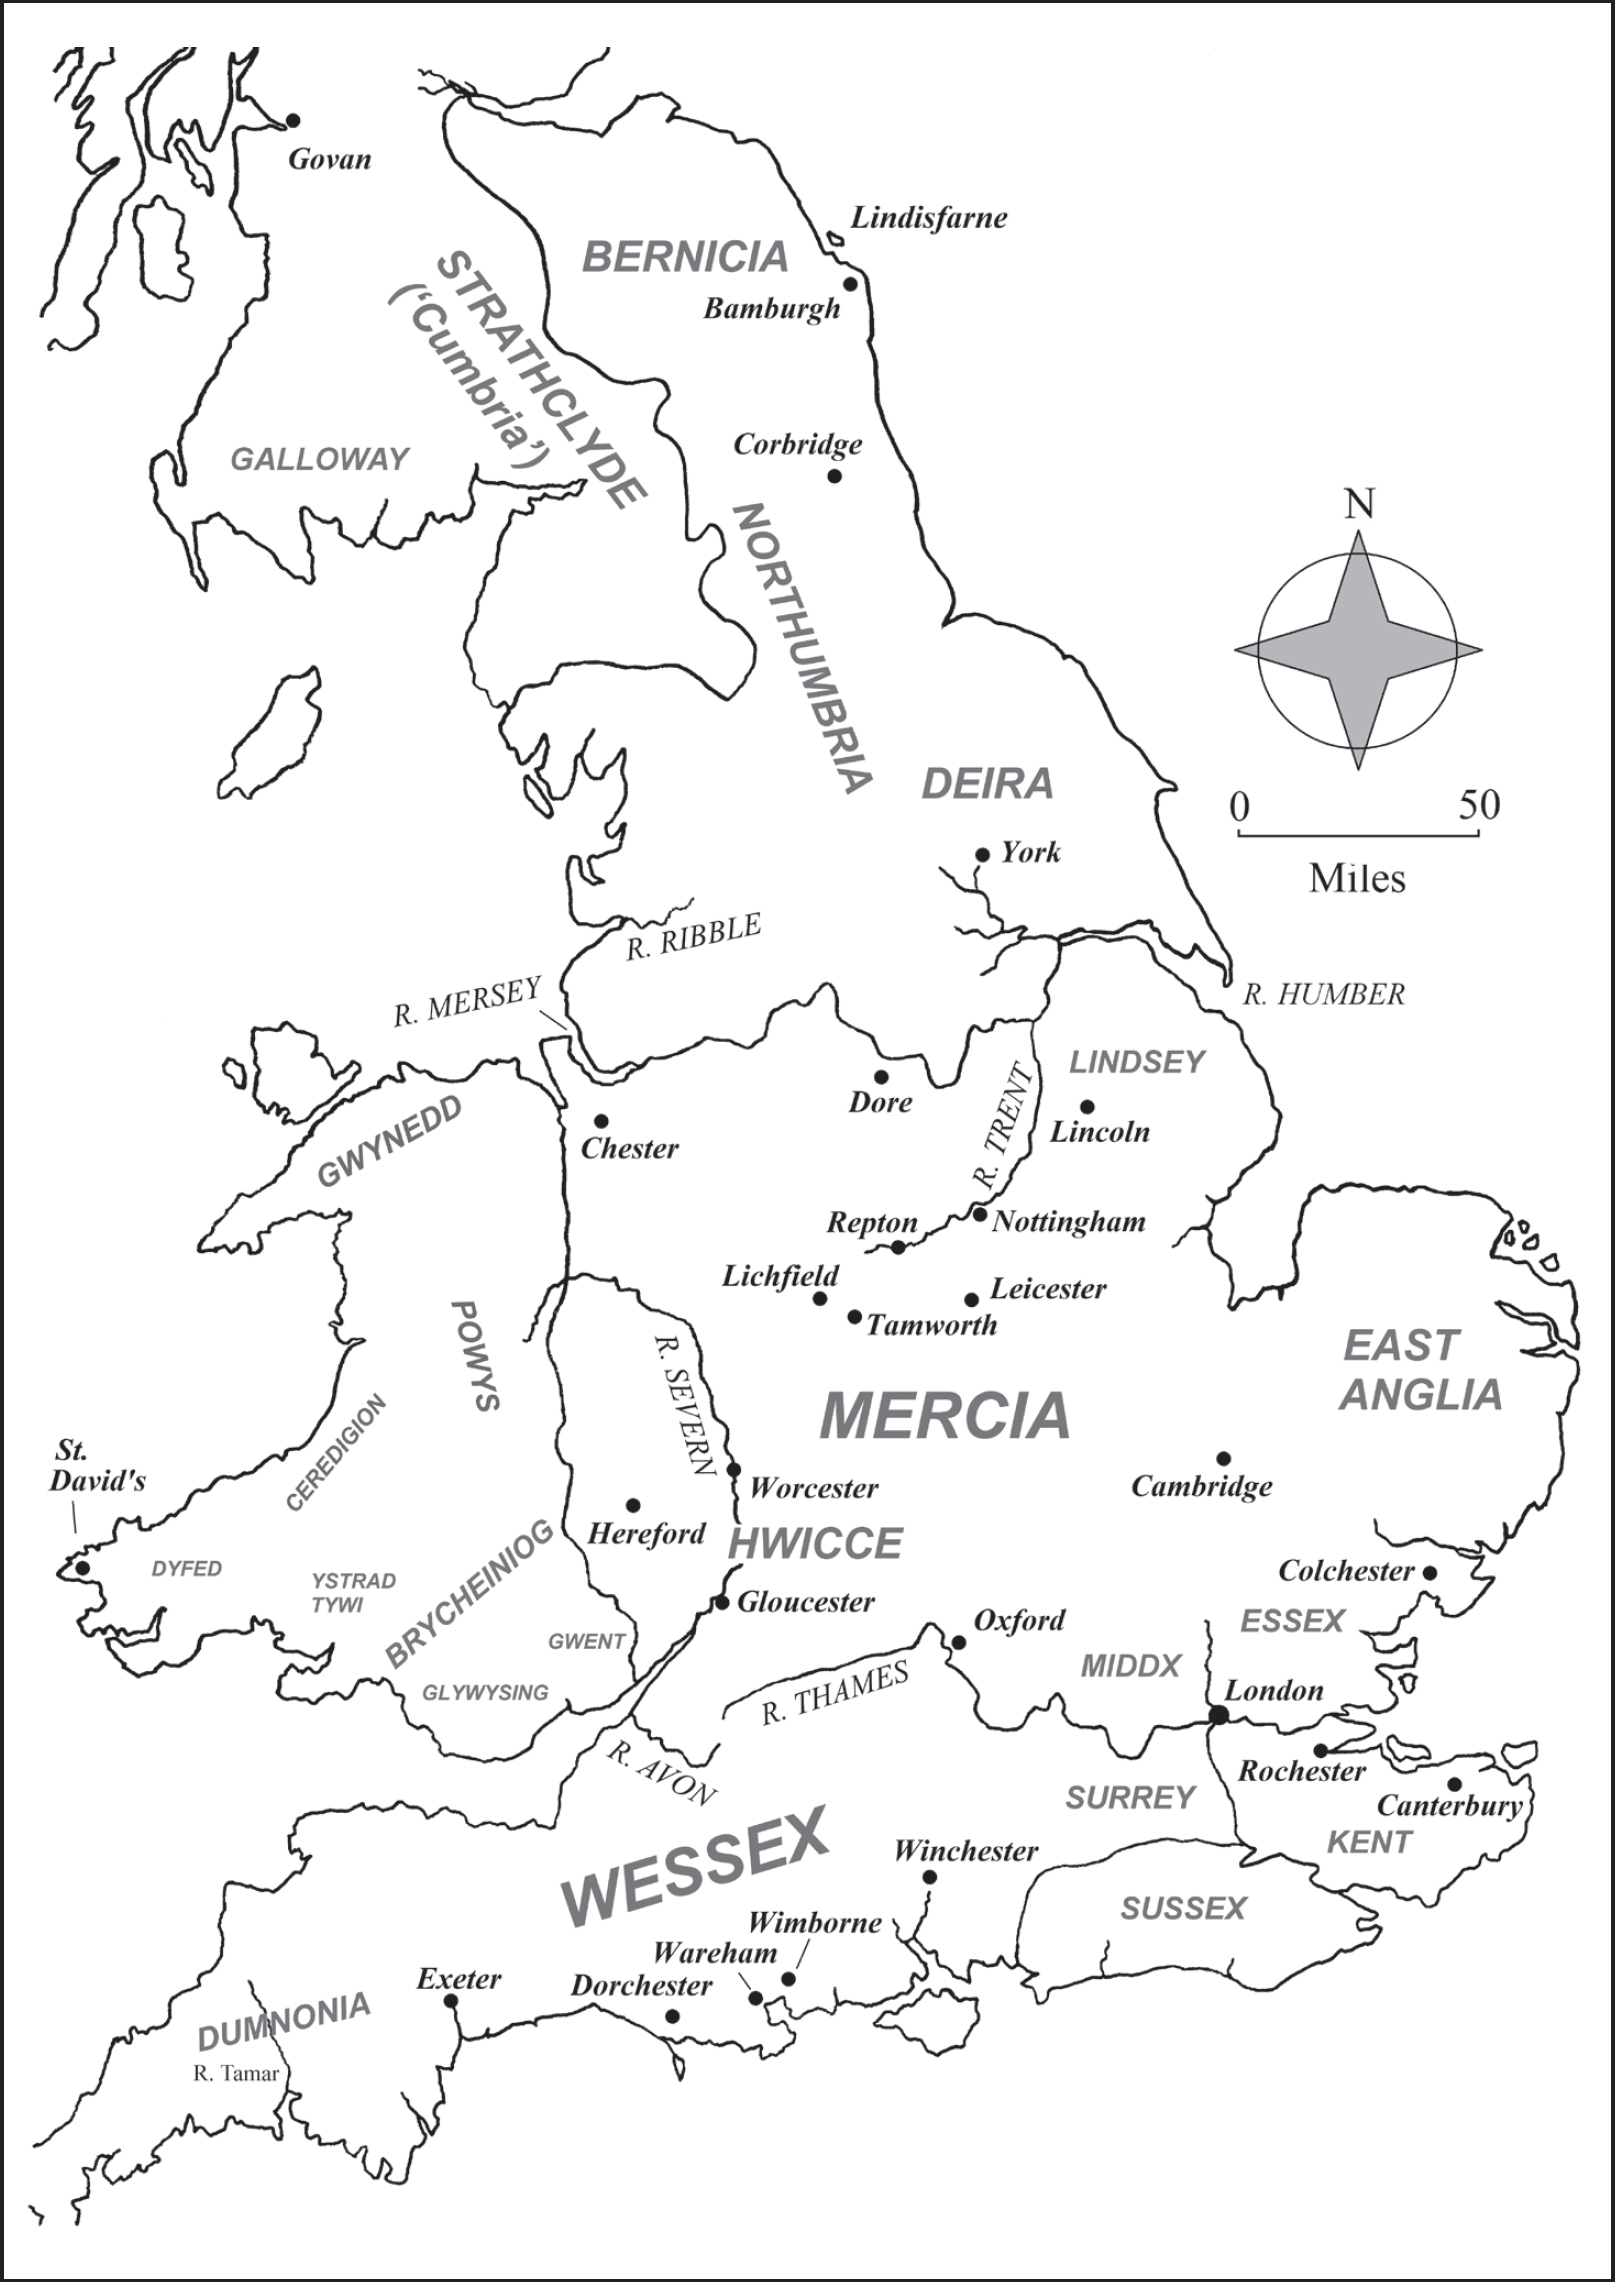 Map 1 Anglo-Saxon England and Wales on the eve of the Danish invasions c 865 - photo 4